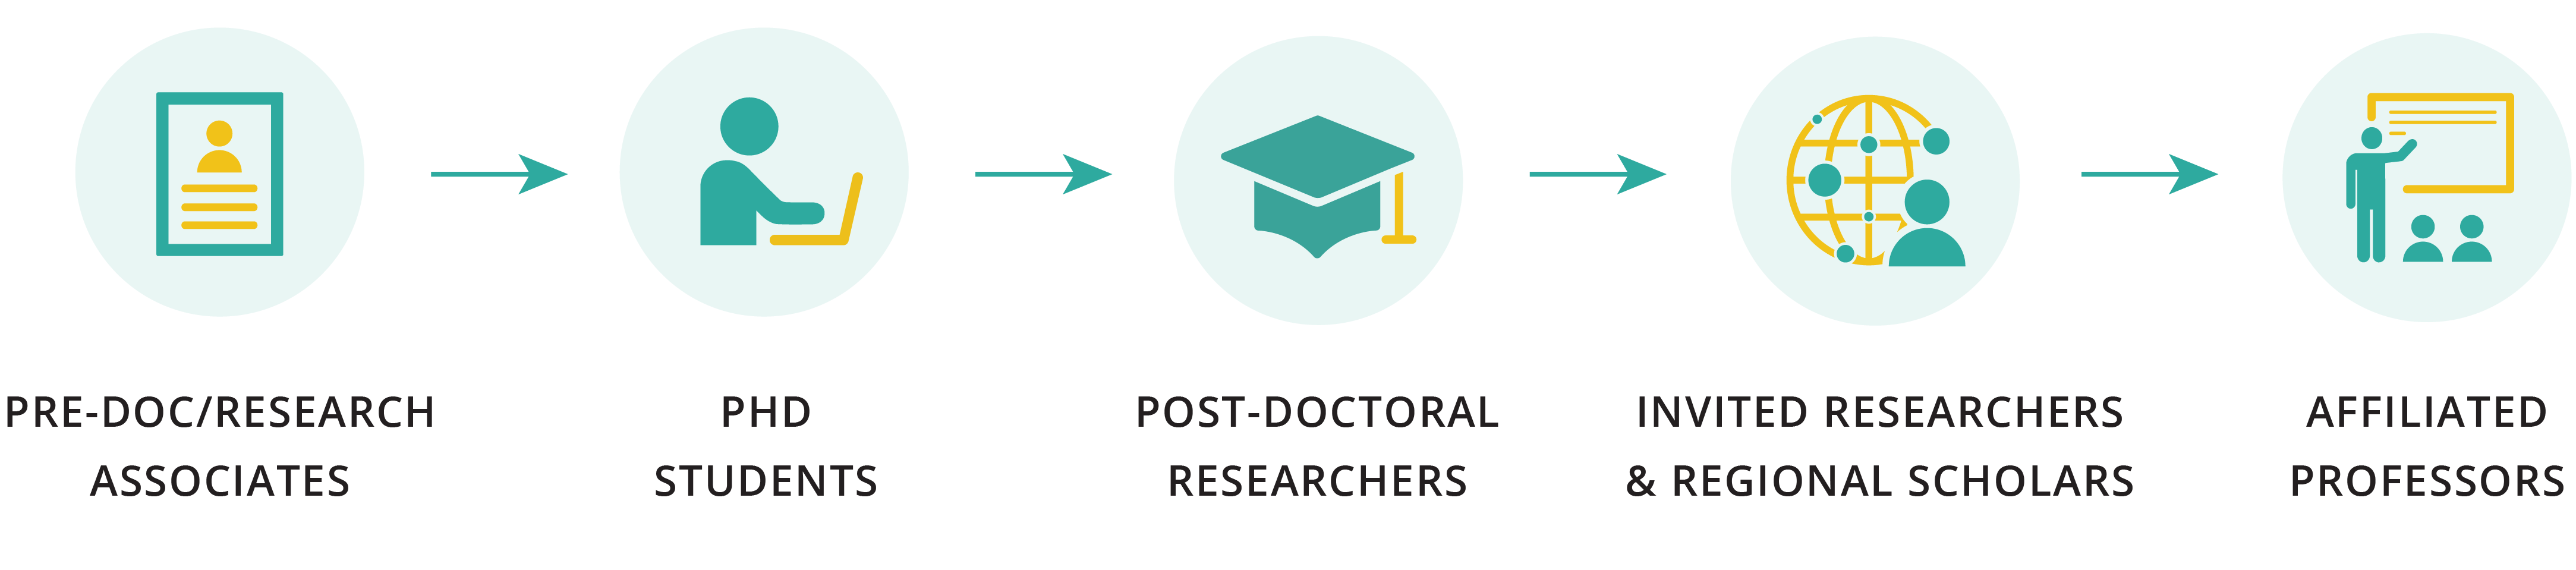 graphic displaying path from pre-doc/research associate to phd student to post-doc researcher to invited researcher to affiliated professors